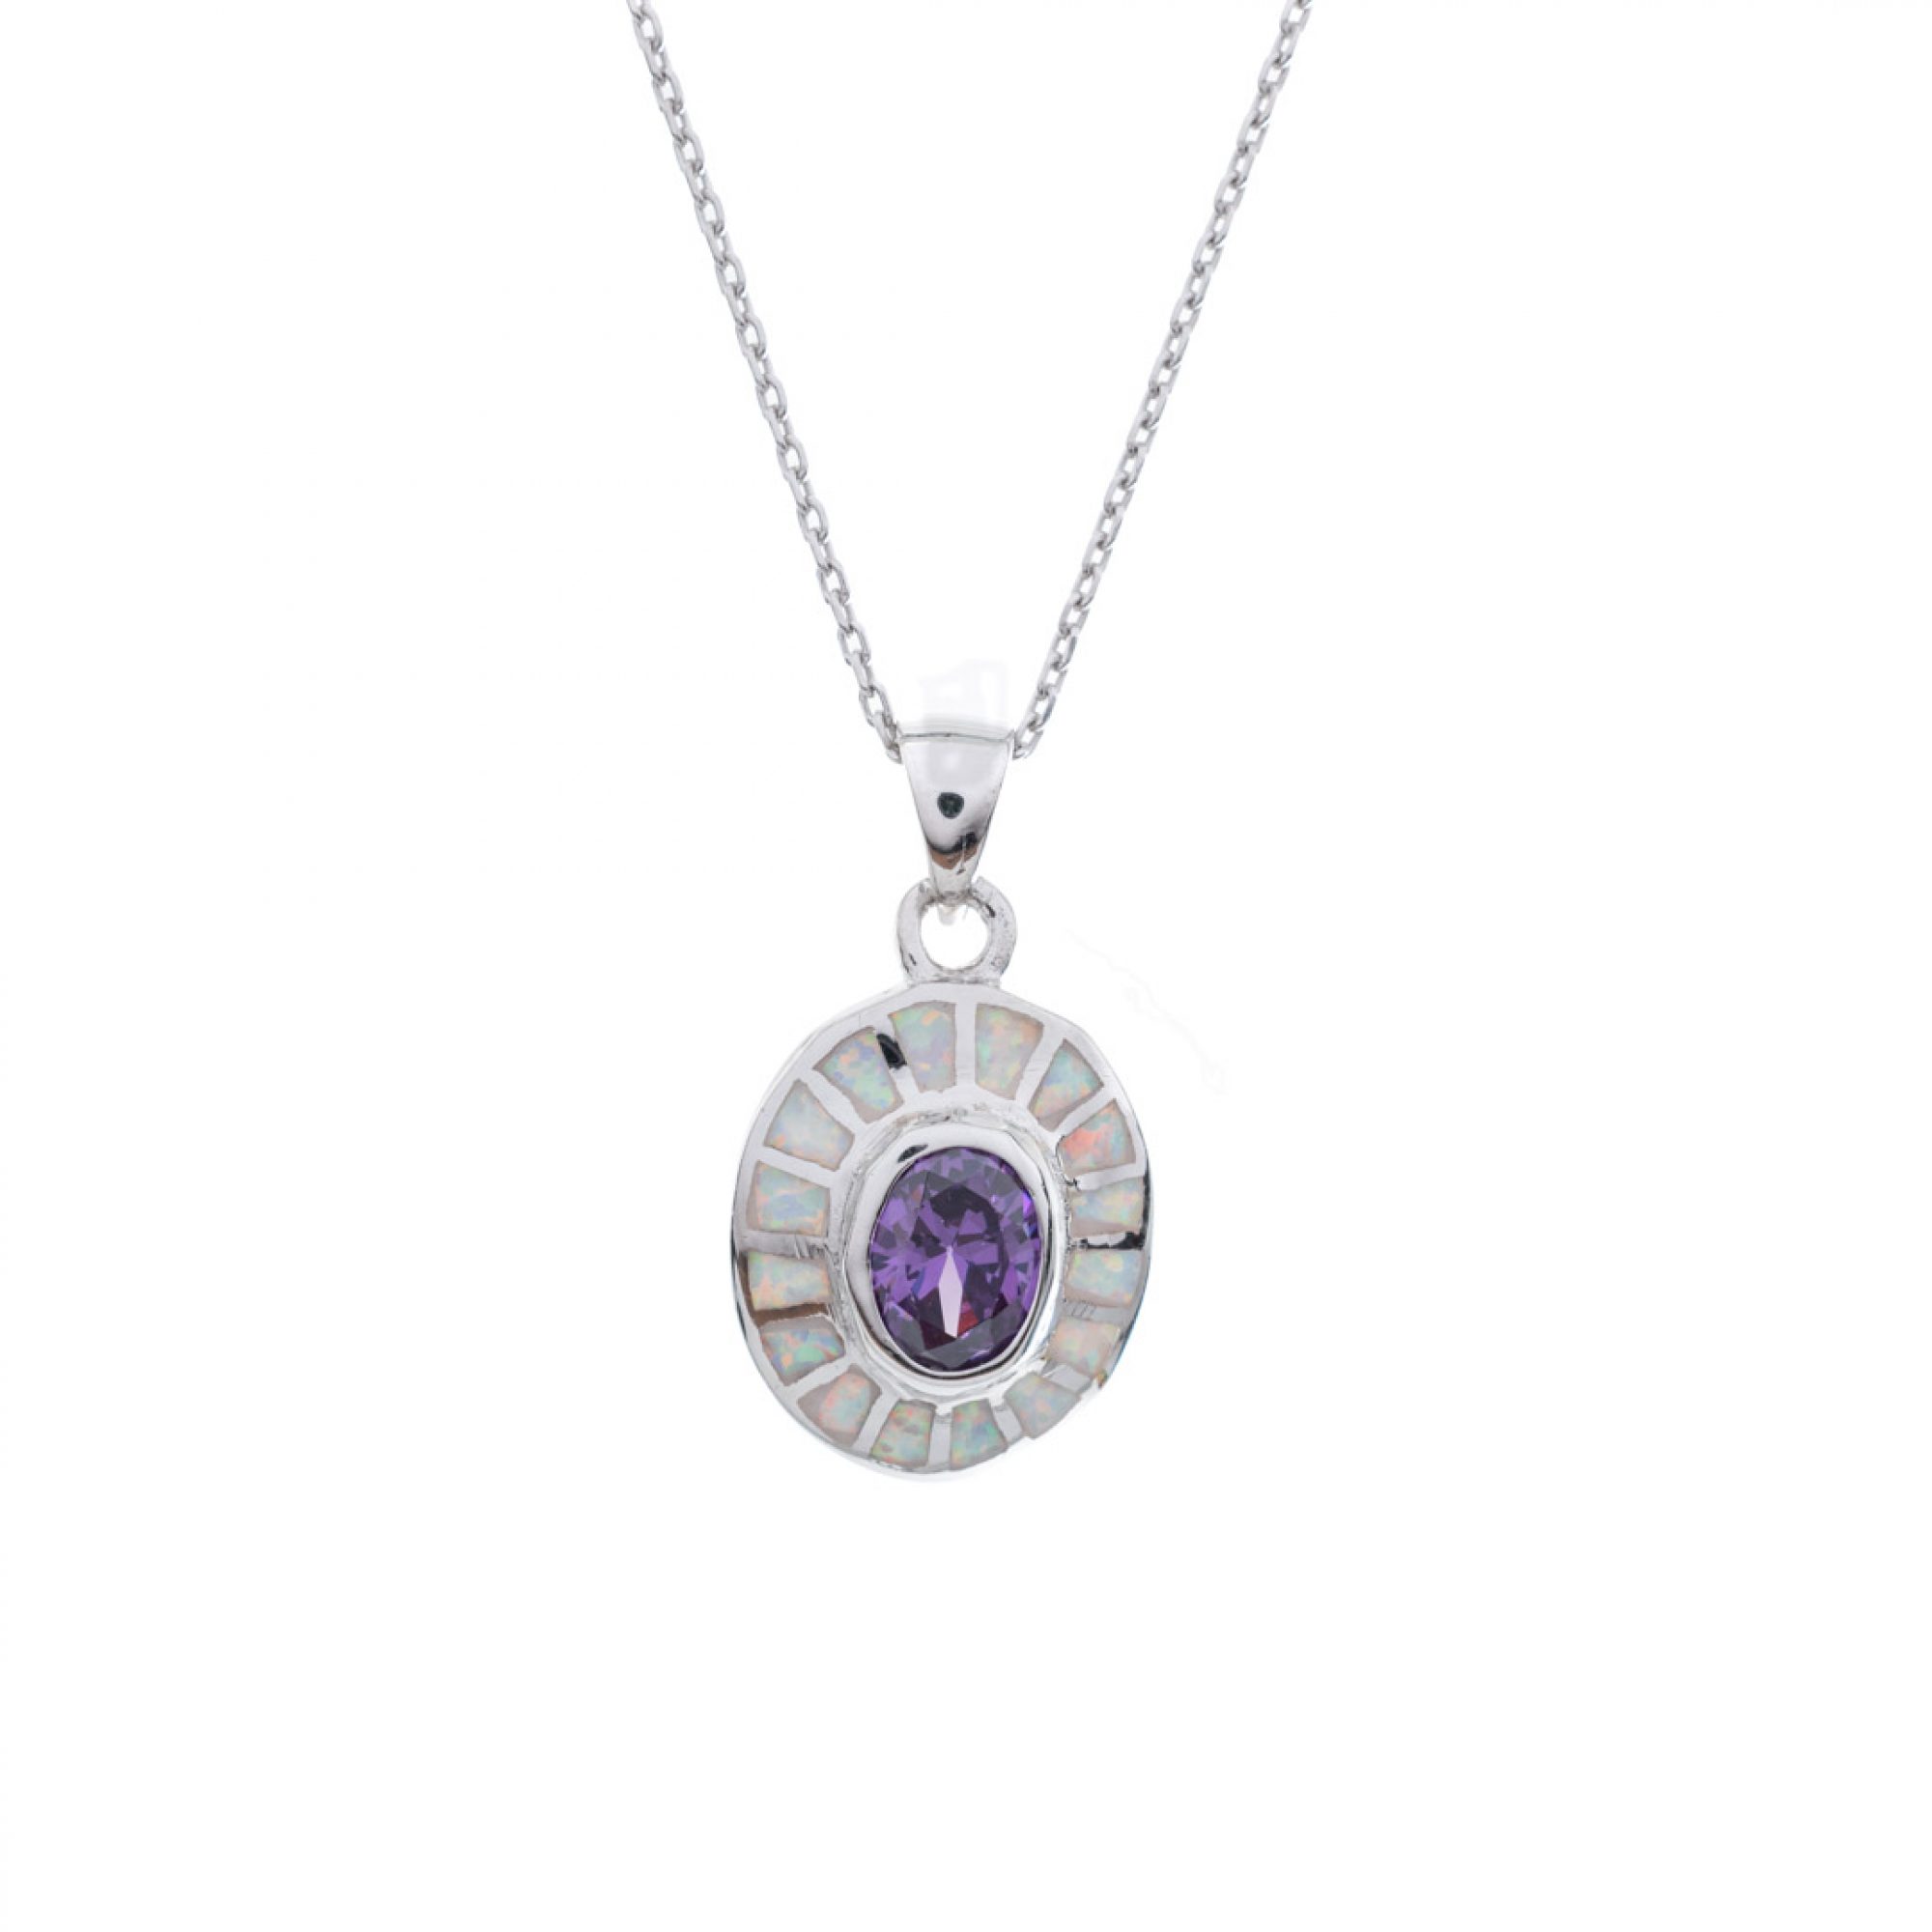 White opal pendant with amethyst stone